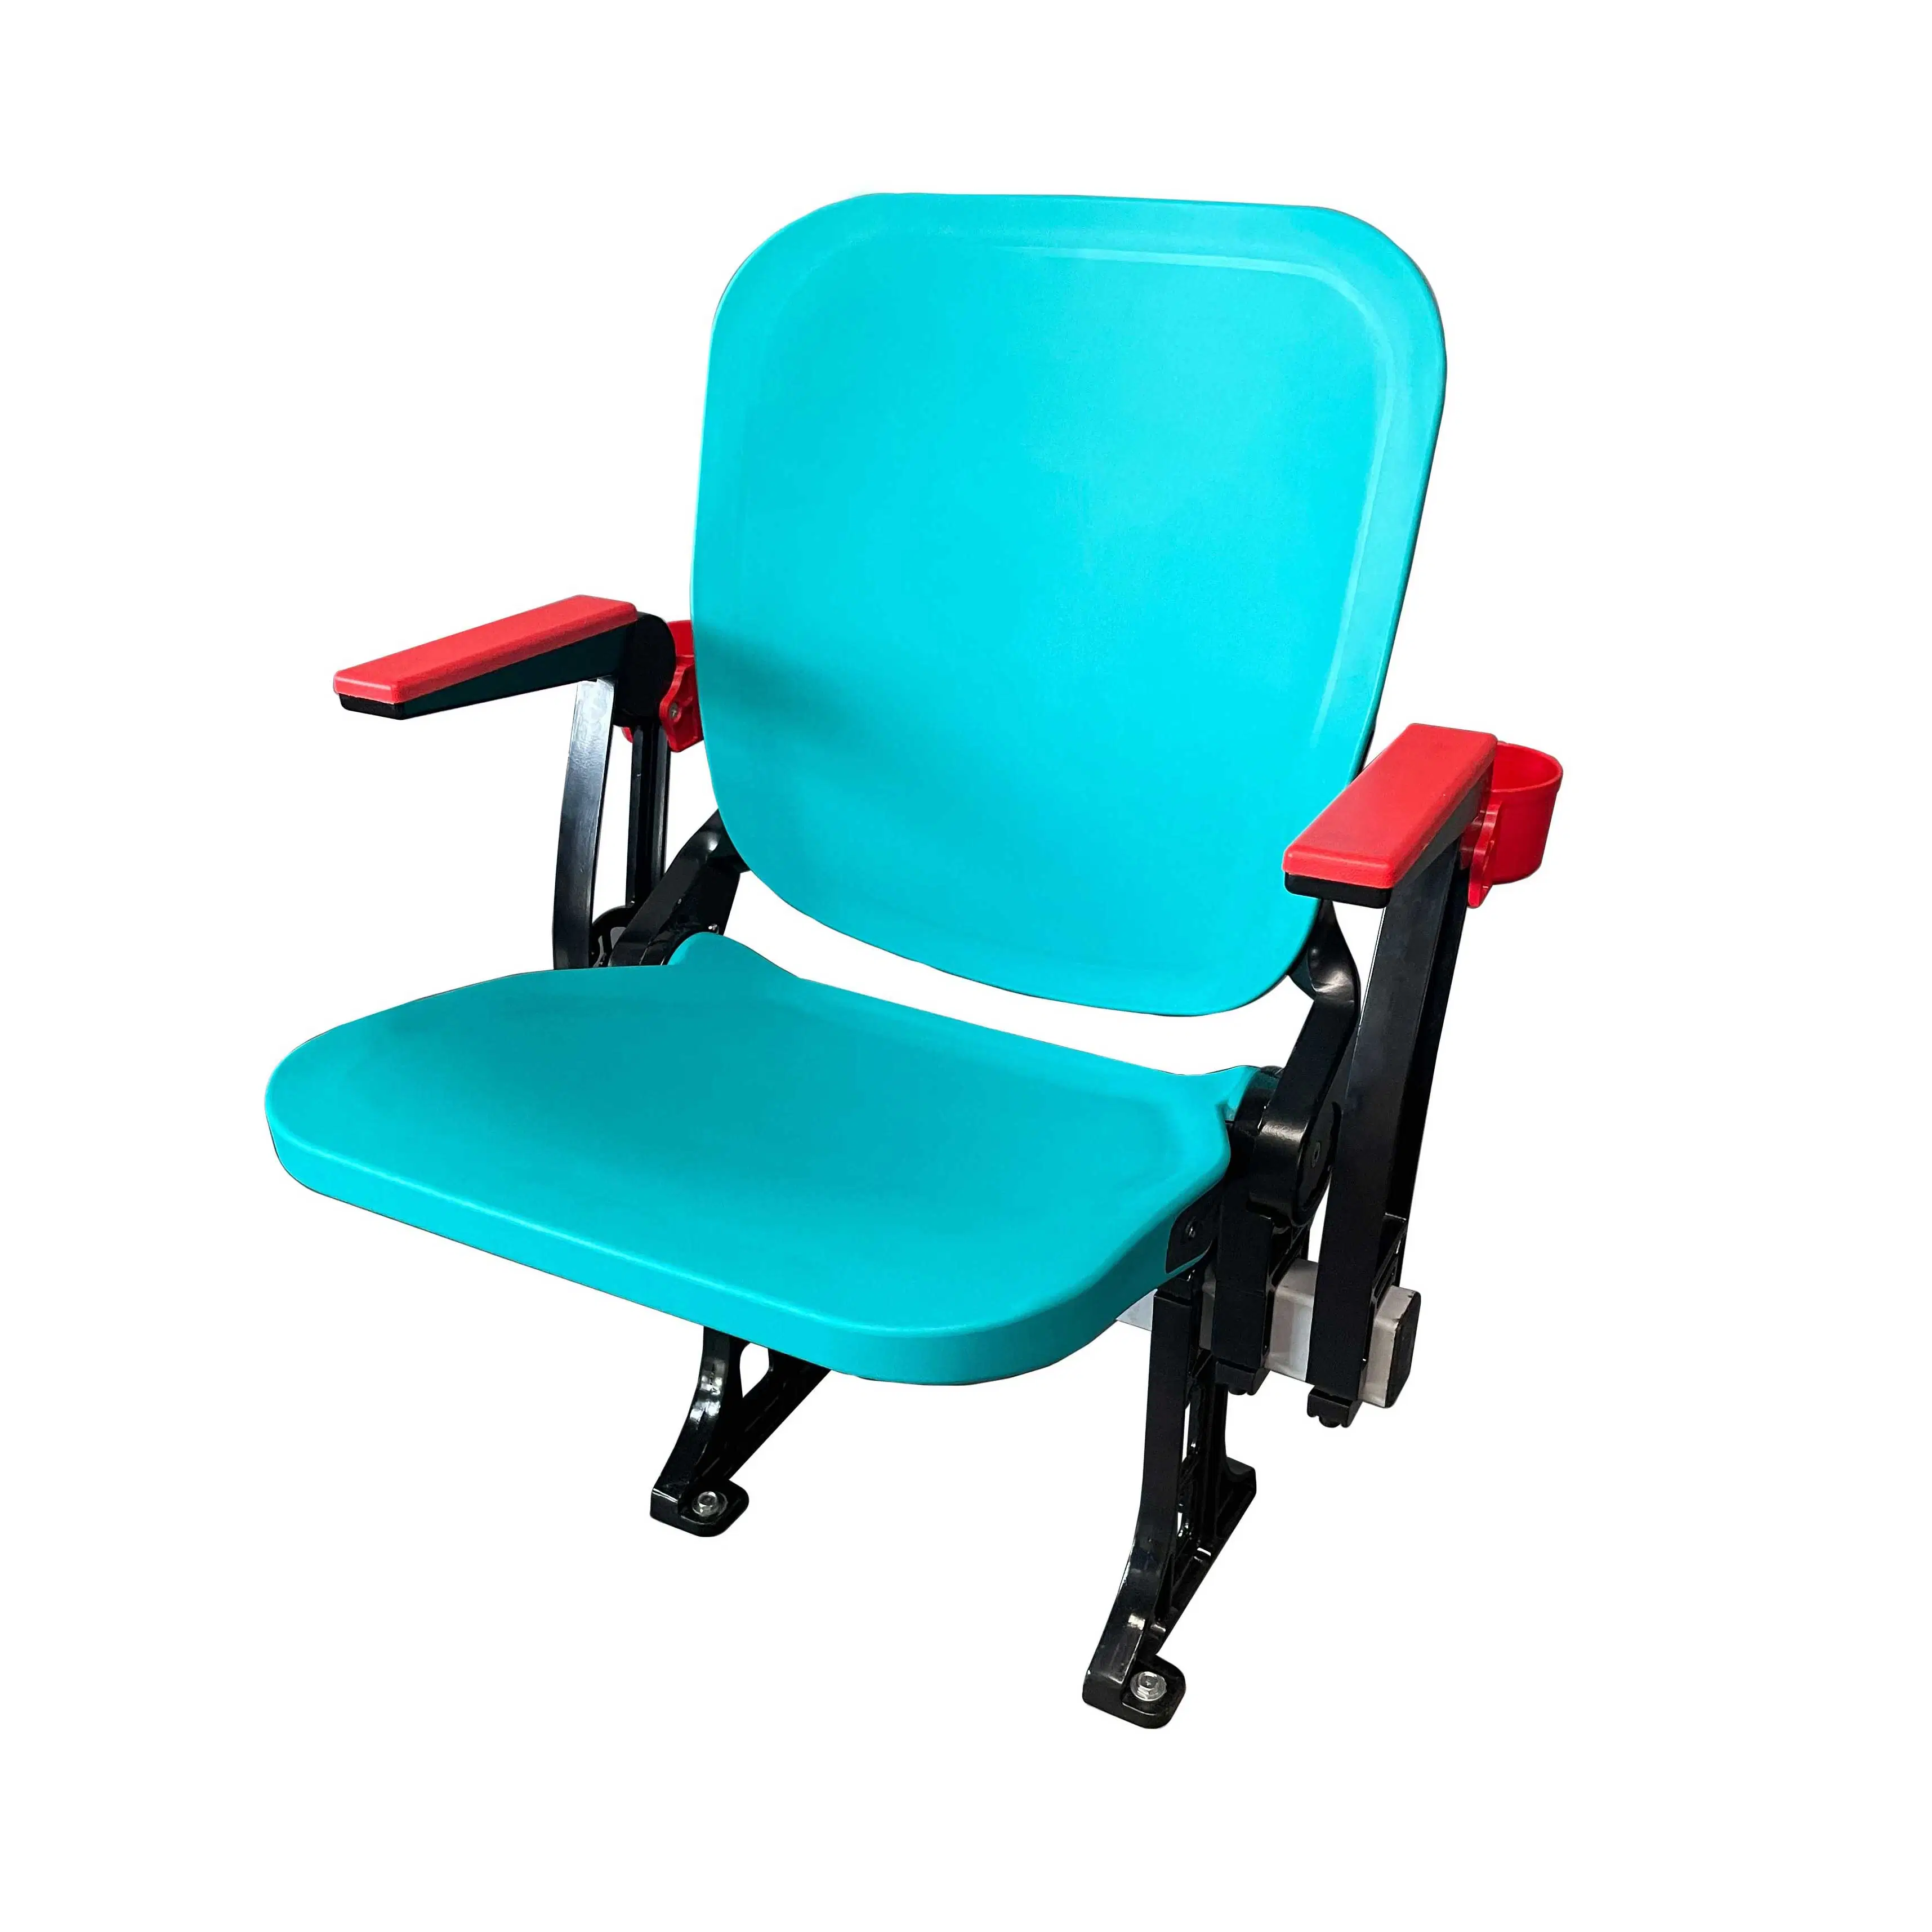 Stunity Wholesale/Supplier 10 Years Warranty En12727 Level 4 Tip-up SGS Approval Folding Stadium Cinema Church FRP Chair Auditorium Chair